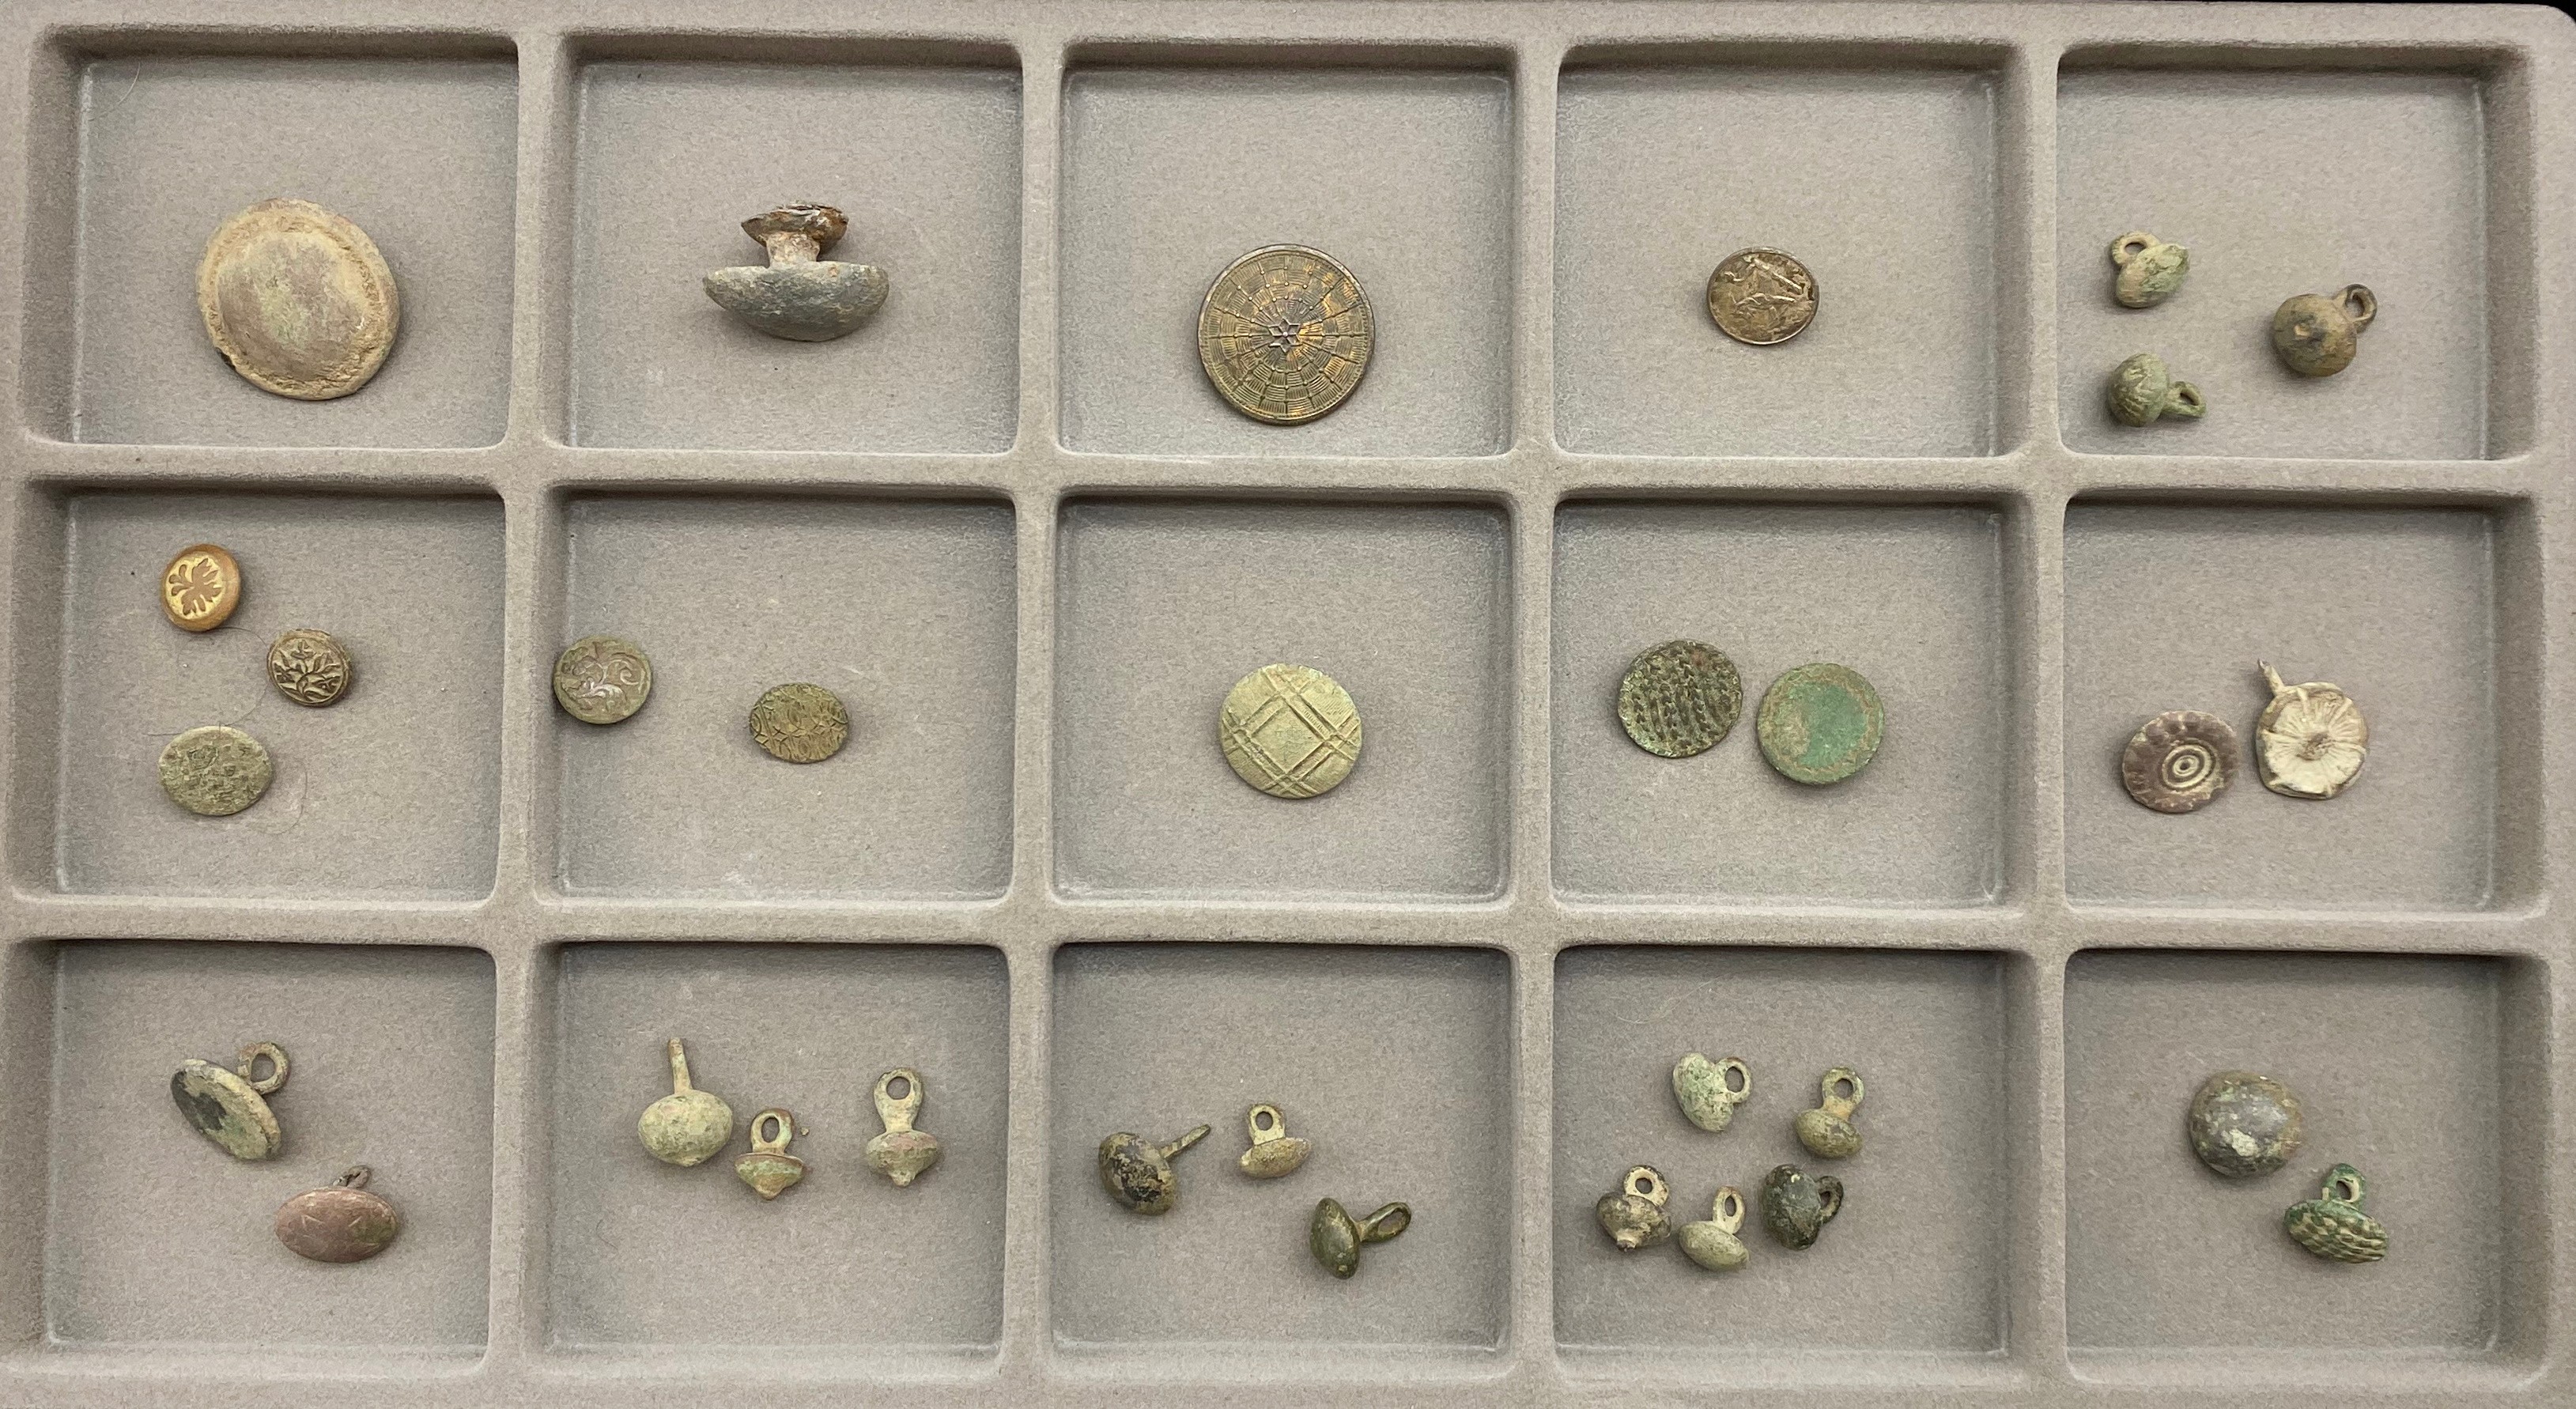 SMALL SELECTION OF VARIOUS BUTTONS - DETECTING FINDS